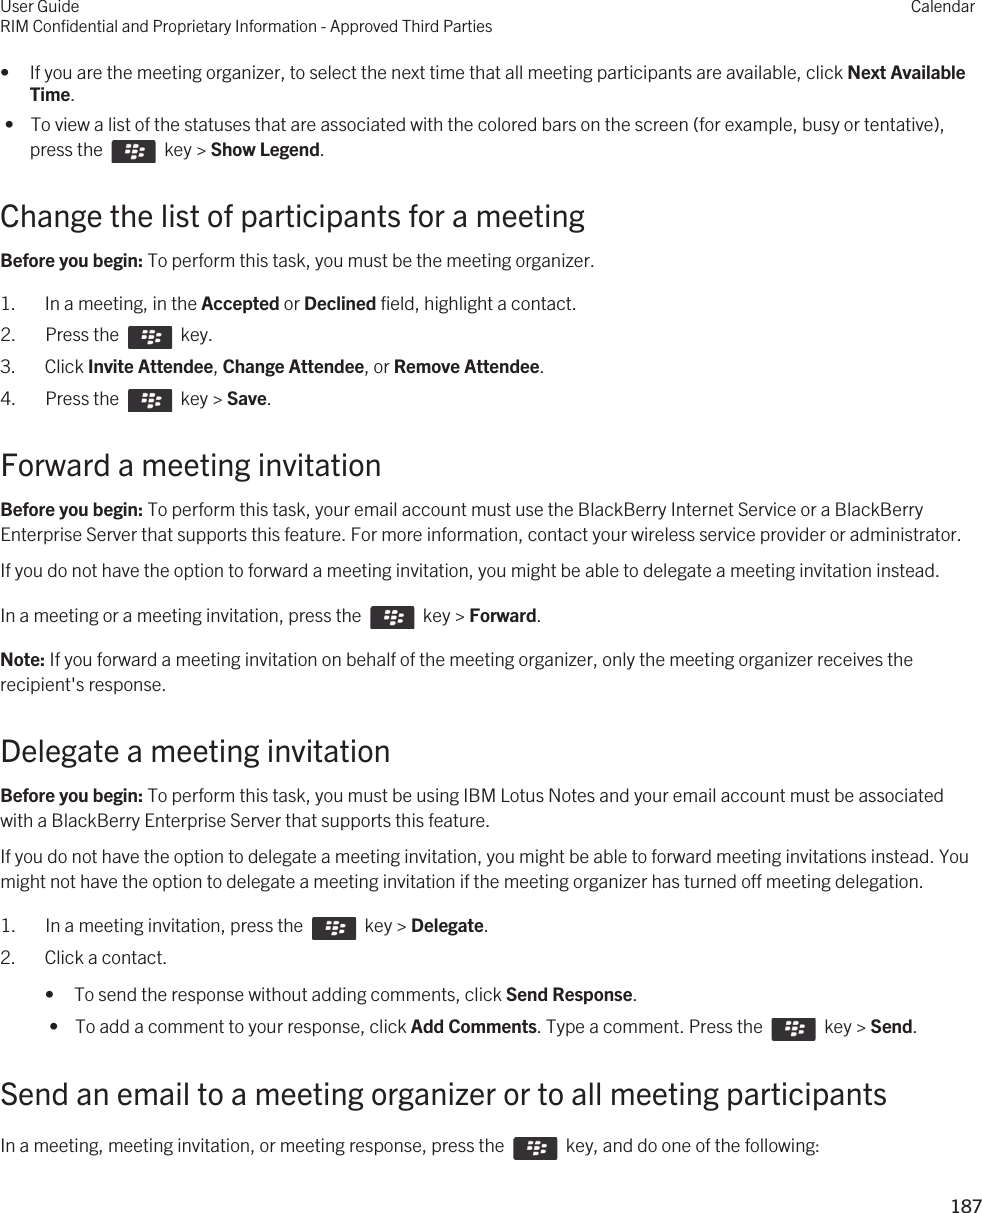 • If you are the meeting organizer, to select the next time that all meeting participants are available, click Next Available Time. •  To view a list of the statuses that are associated with the colored bars on the screen (for example, busy or tentative), press the    key &gt; Show Legend.Change the list of participants for a meetingBefore you begin: To perform this task, you must be the meeting organizer.1. In a meeting, in the Accepted or Declined field, highlight a contact.2.  Press the    key. 3. Click Invite Attendee, Change Attendee, or Remove Attendee.4.  Press the    key &gt; Save. Forward a meeting invitationBefore you begin: To perform this task, your email account must use the BlackBerry Internet Service or a BlackBerry Enterprise Server that supports this feature. For more information, contact your wireless service provider or administrator. If you do not have the option to forward a meeting invitation, you might be able to delegate a meeting invitation instead.In a meeting or a meeting invitation, press the    key &gt; Forward.Note: If you forward a meeting invitation on behalf of the meeting organizer, only the meeting organizer receives the recipient&apos;s response.Delegate a meeting invitationBefore you begin: To perform this task, you must be using IBM Lotus Notes and your email account must be associated with a BlackBerry Enterprise Server that supports this feature.If you do not have the option to delegate a meeting invitation, you might be able to forward meeting invitations instead. You might not have the option to delegate a meeting invitation if the meeting organizer has turned off meeting delegation.1.  In a meeting invitation, press the    key &gt; Delegate.2. Click a contact.• To send the response without adding comments, click Send Response. •  To add a comment to your response, click Add Comments. Type a comment. Press the    key &gt; Send.Send an email to a meeting organizer or to all meeting participantsIn a meeting, meeting invitation, or meeting response, press the    key, and do one of the following: User GuideRIM Confidential and Proprietary Information - Approved Third PartiesCalendar187 